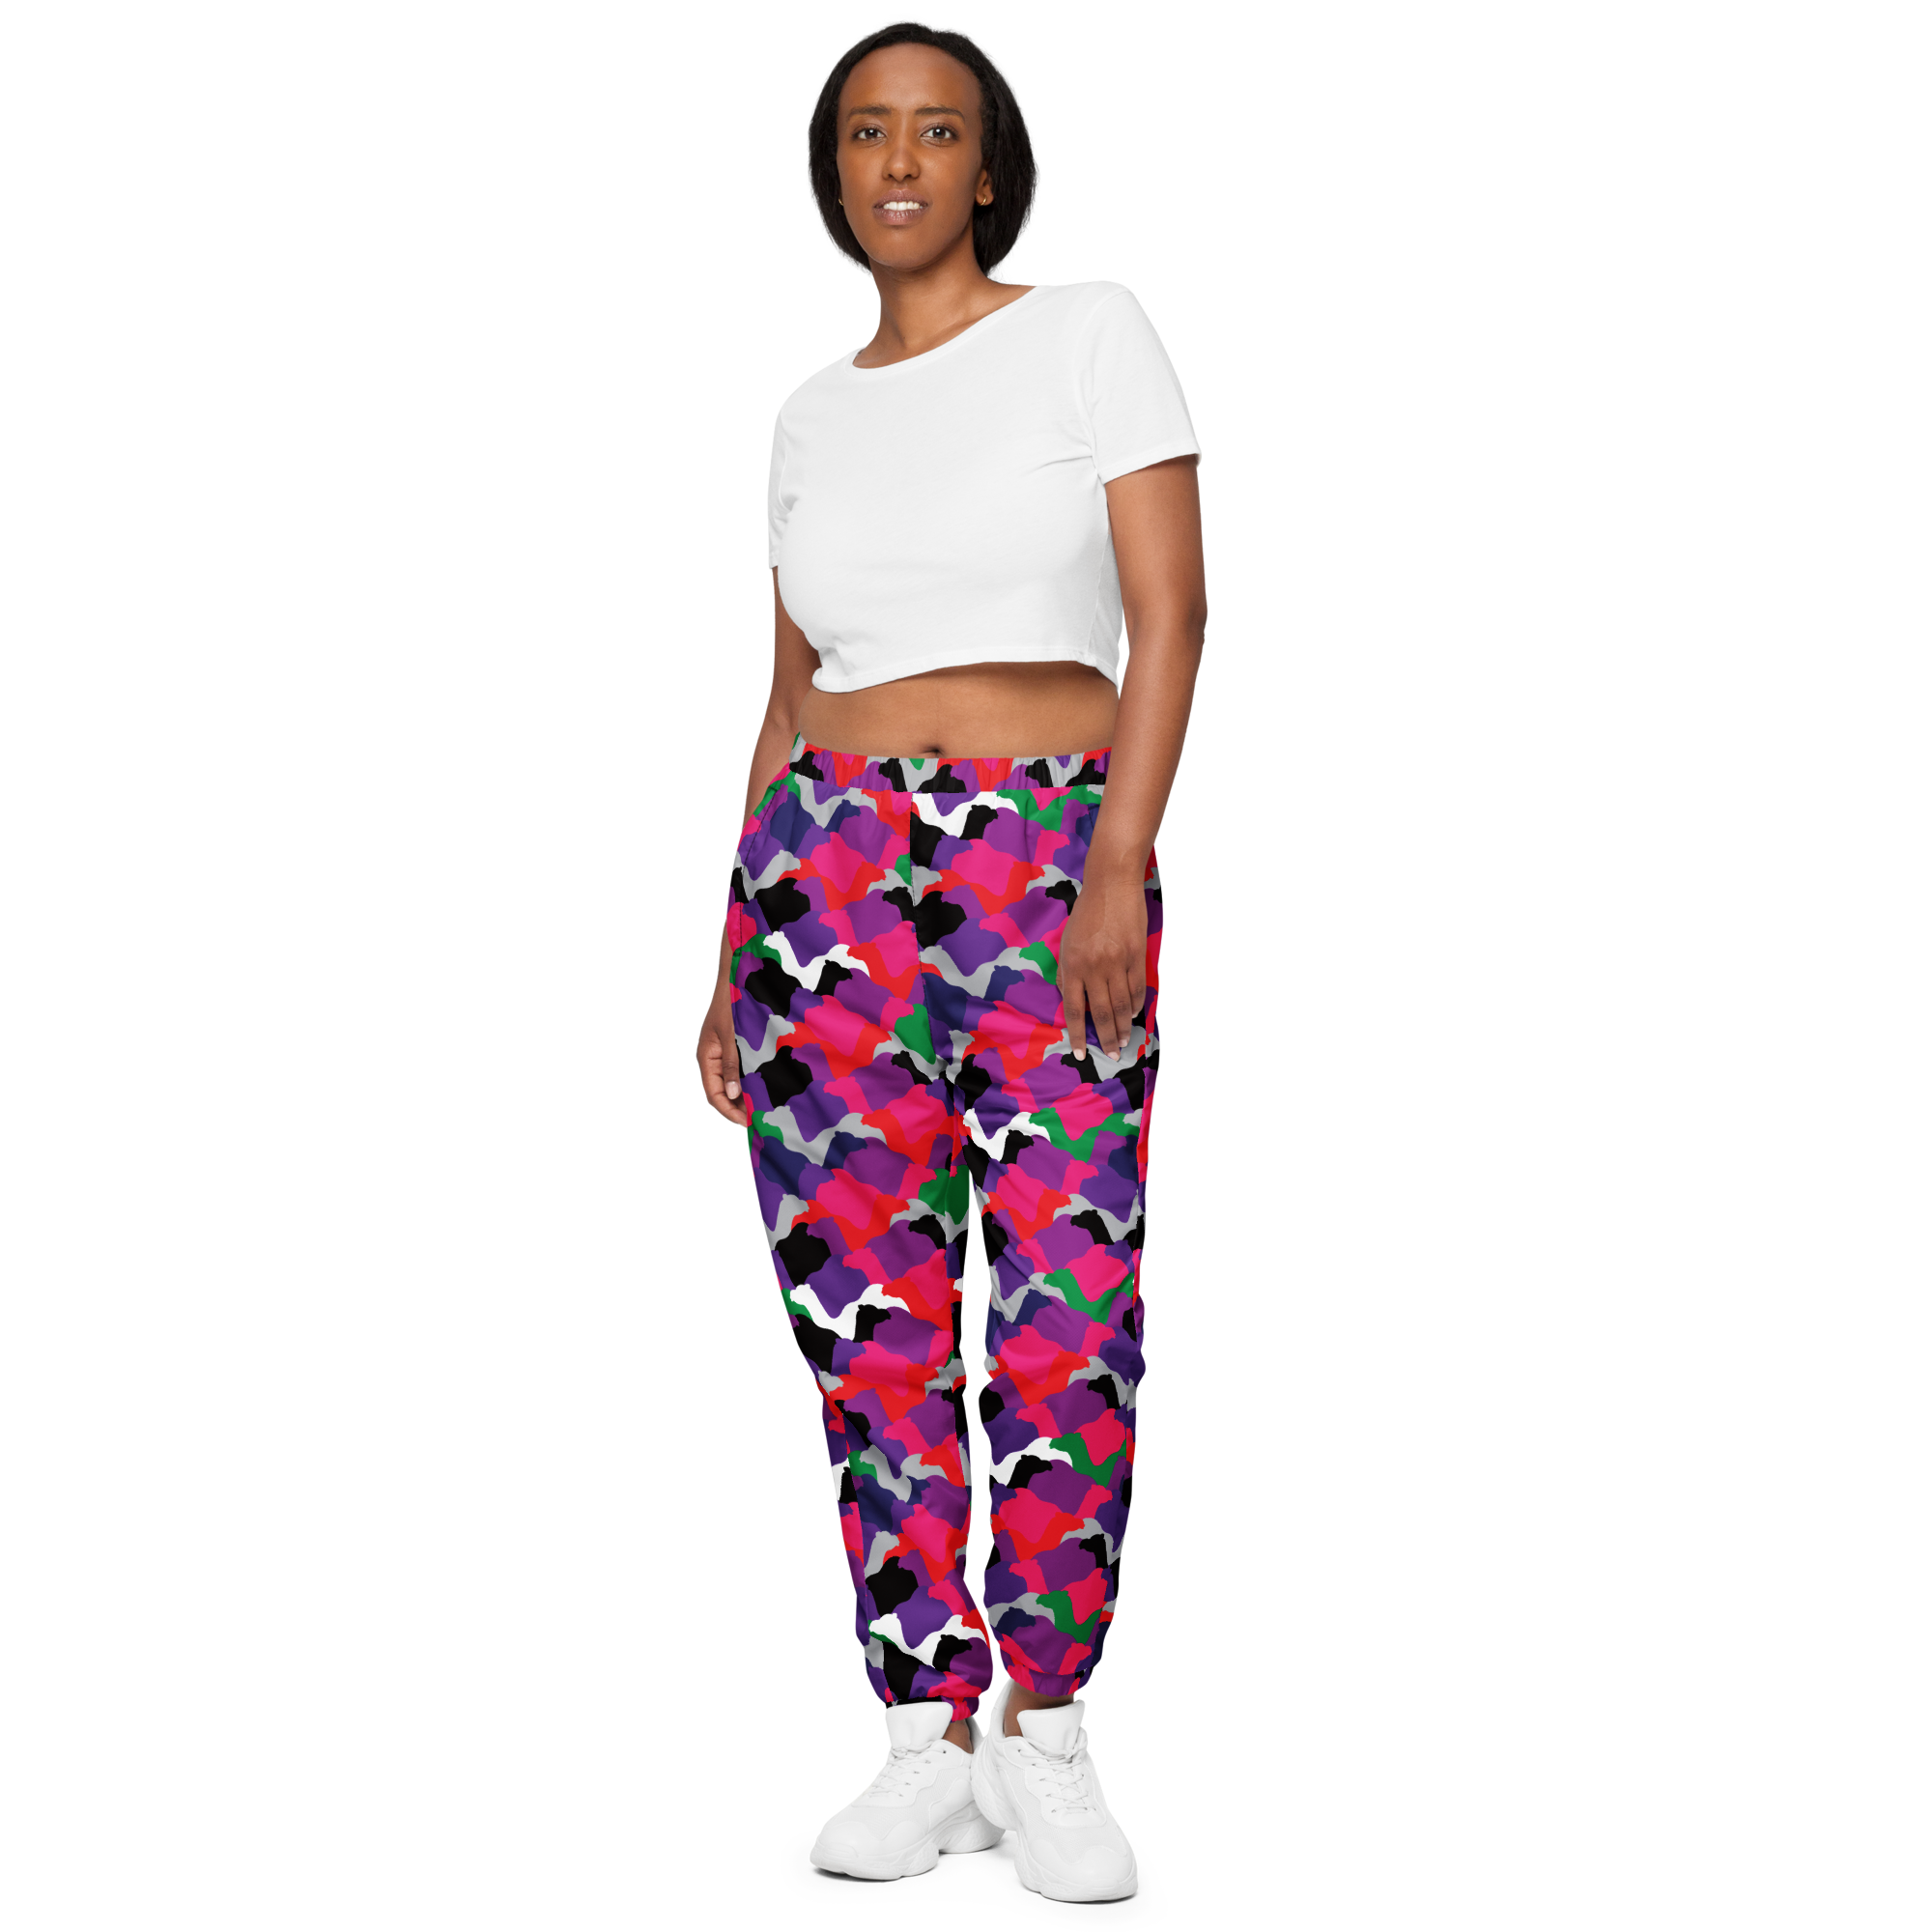 all-over-print-unisex-track-pants-black-front-6355f150d04c1.png